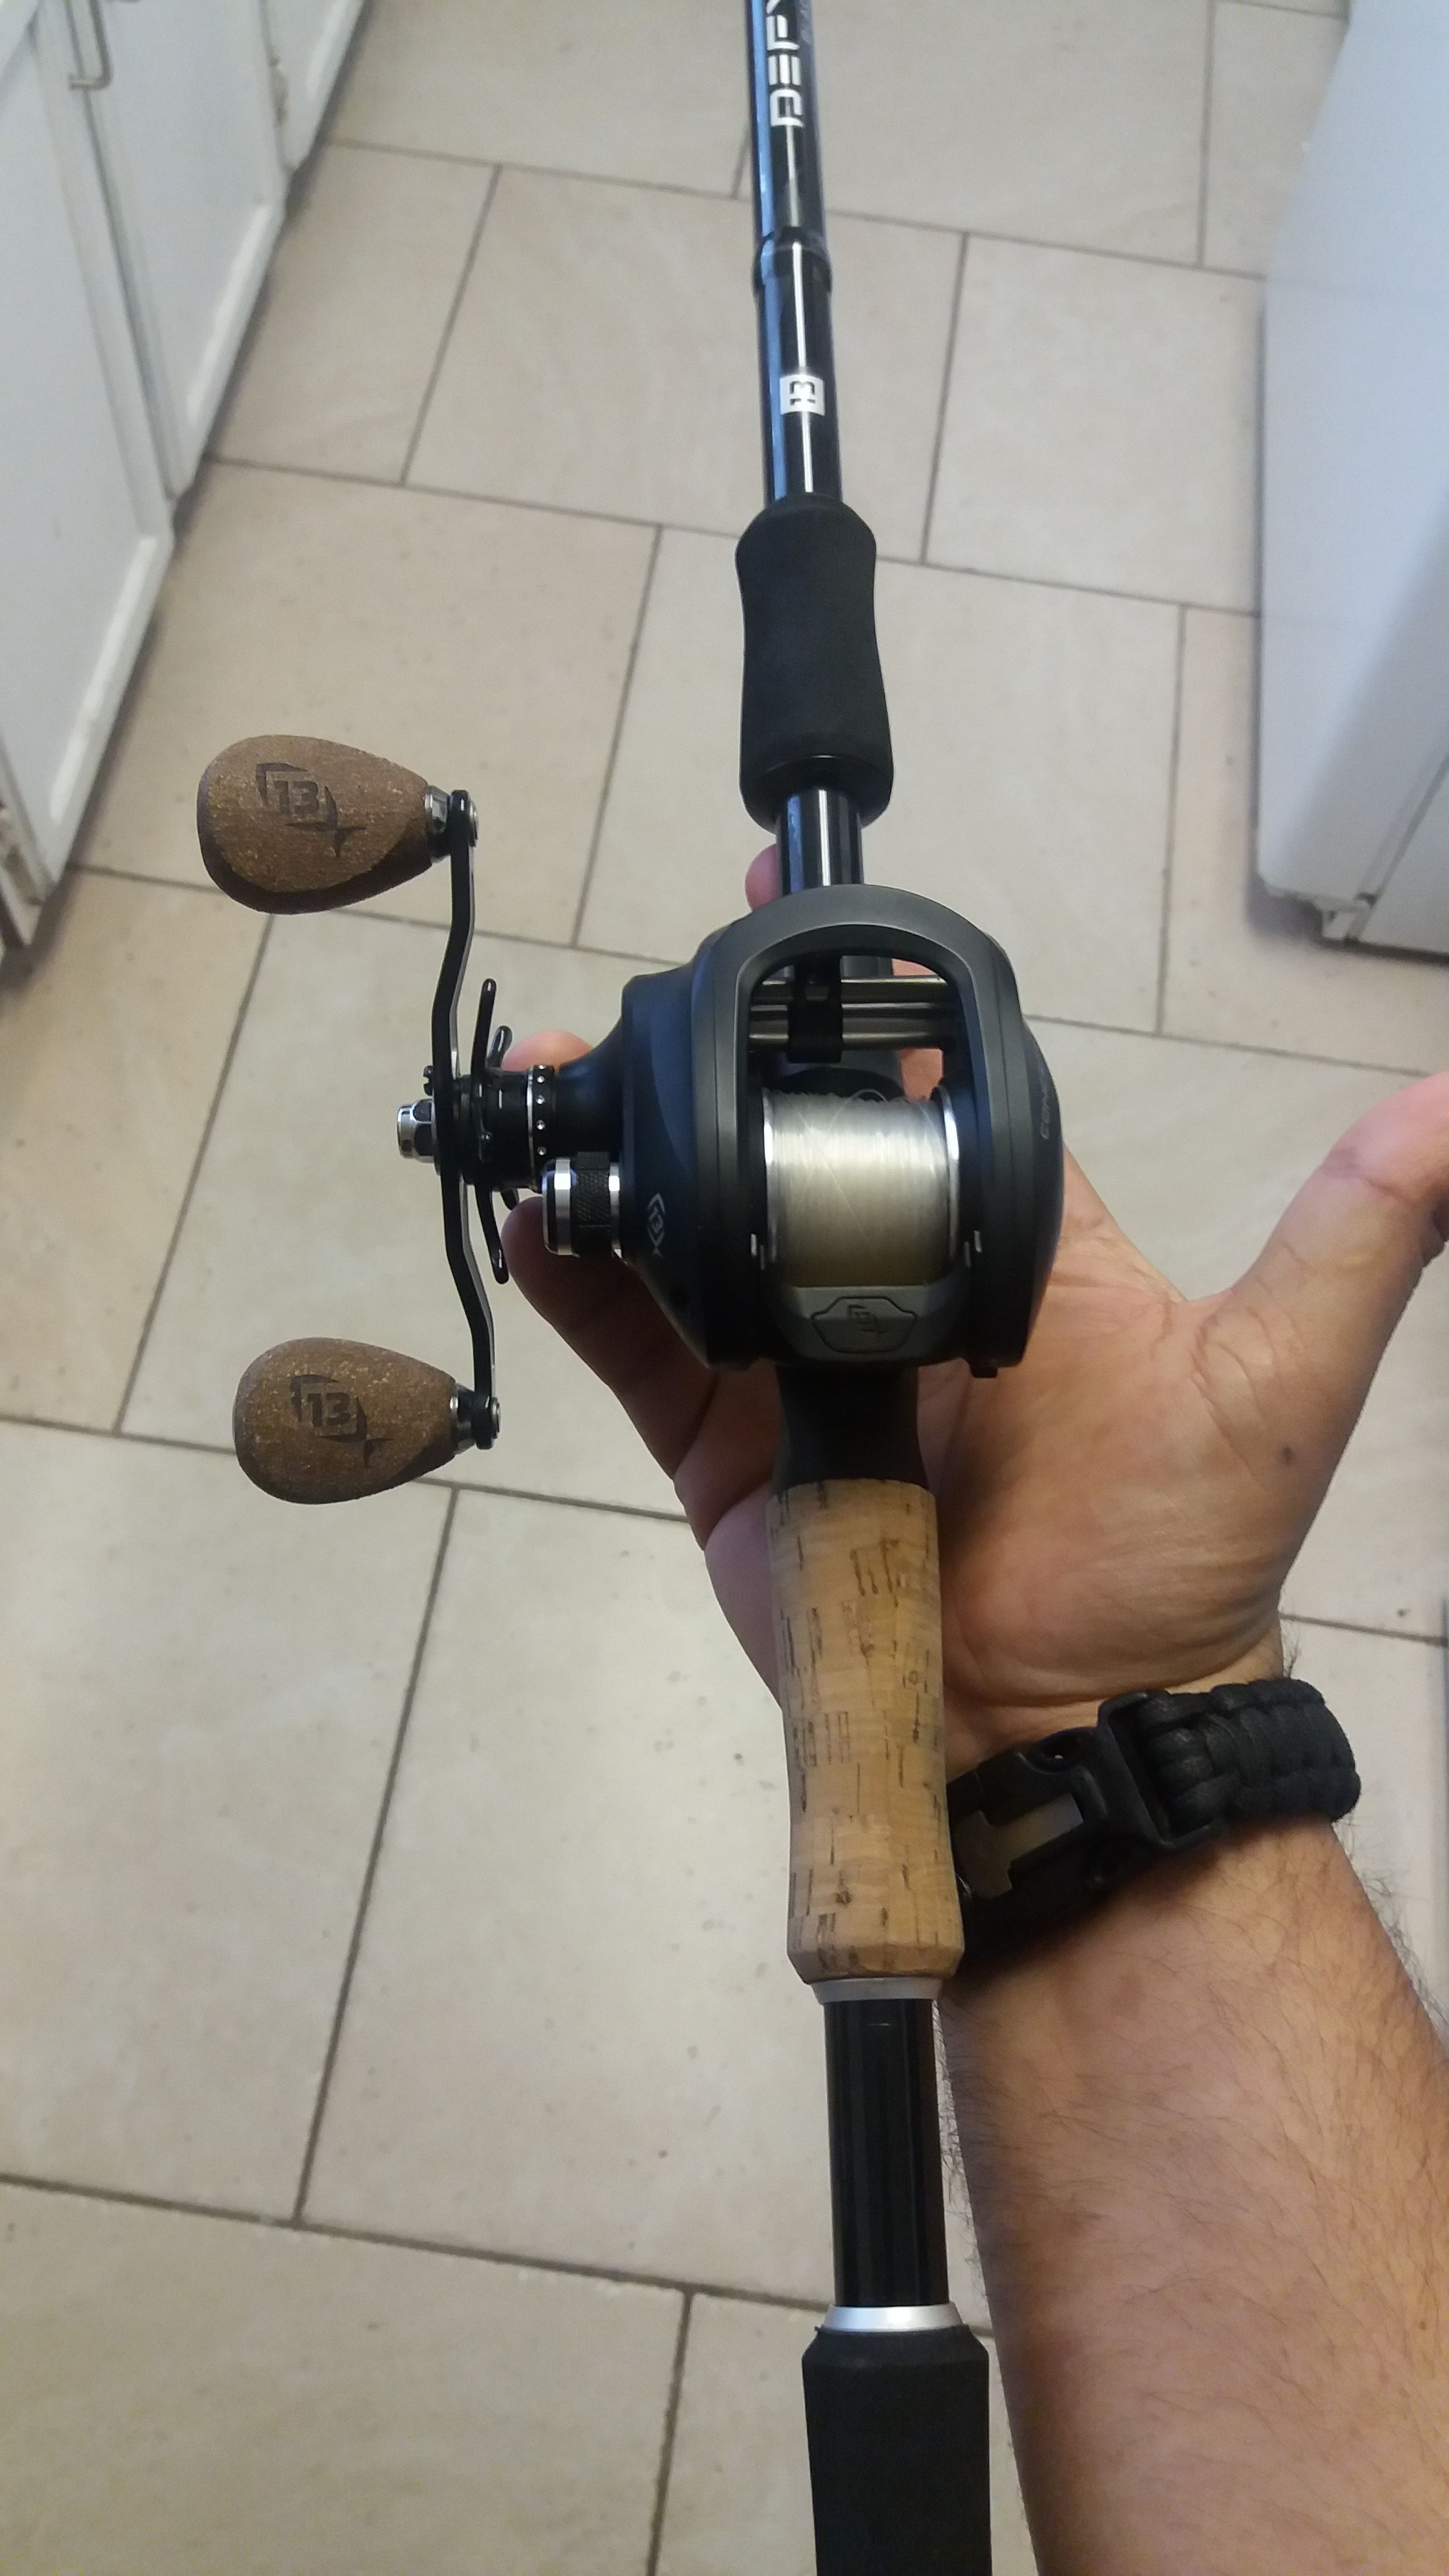 13 Fishing Swimbait reel Concept A3 in Lefty, 13 Fishing Defy